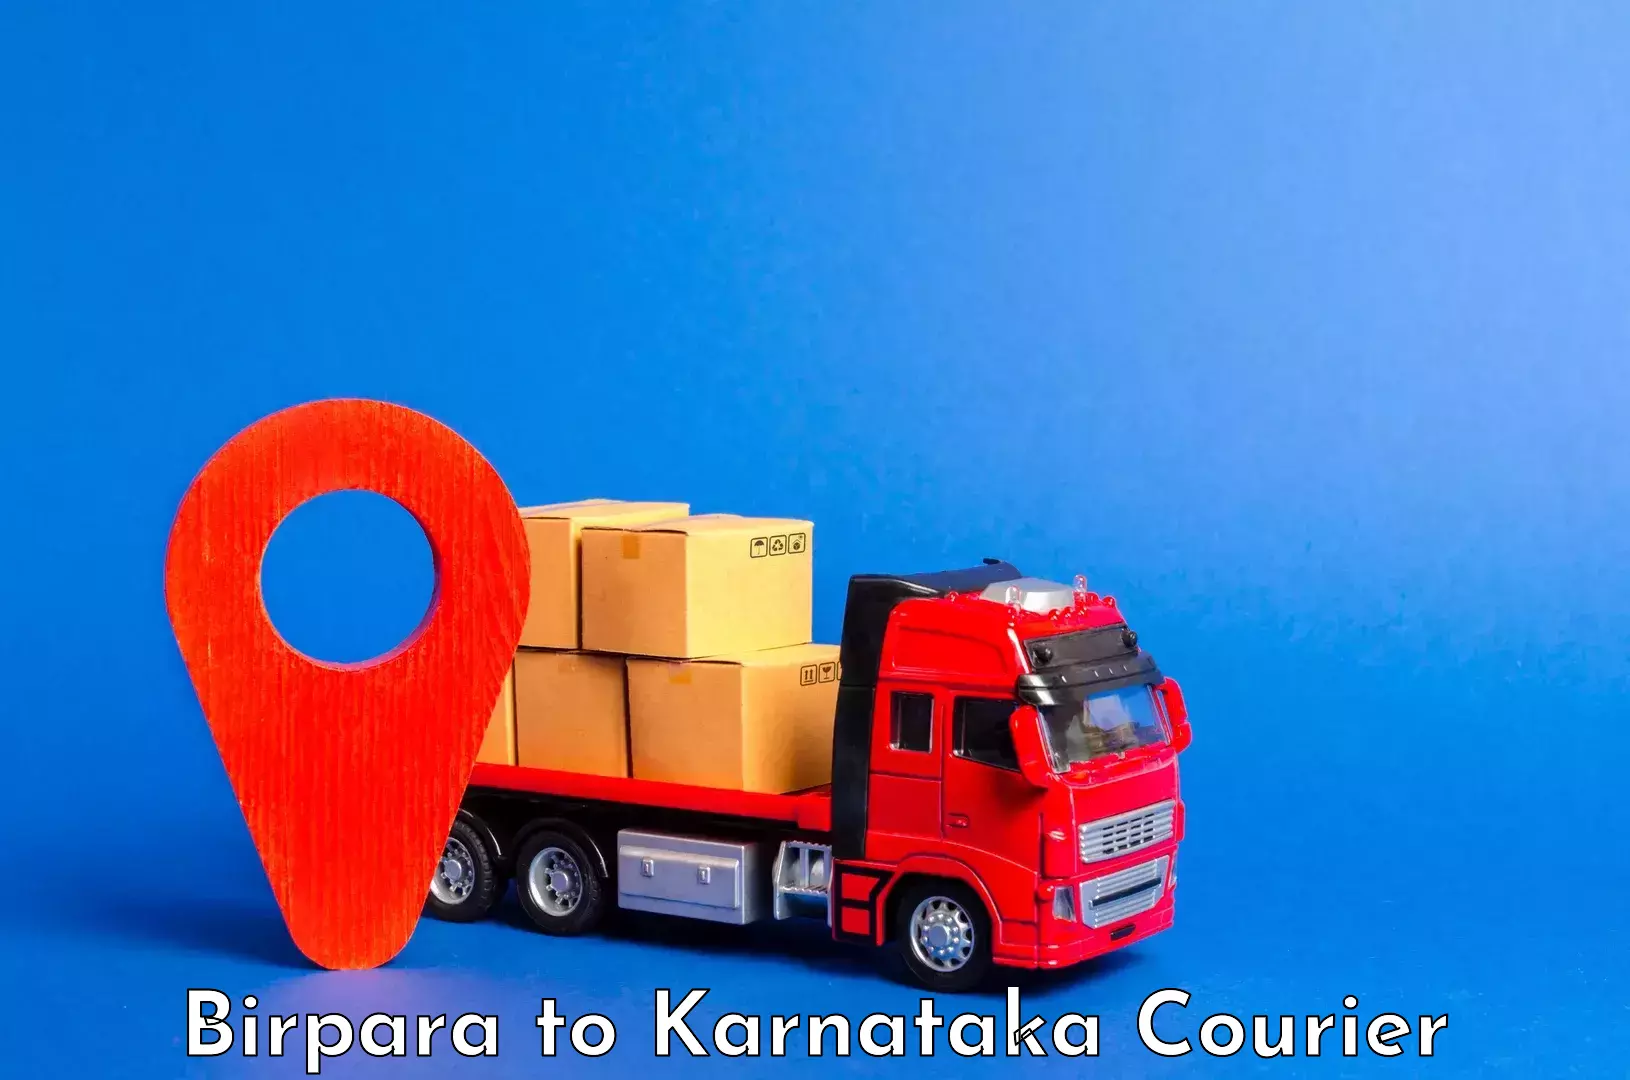 Luggage transport operations Birpara to Dharwad